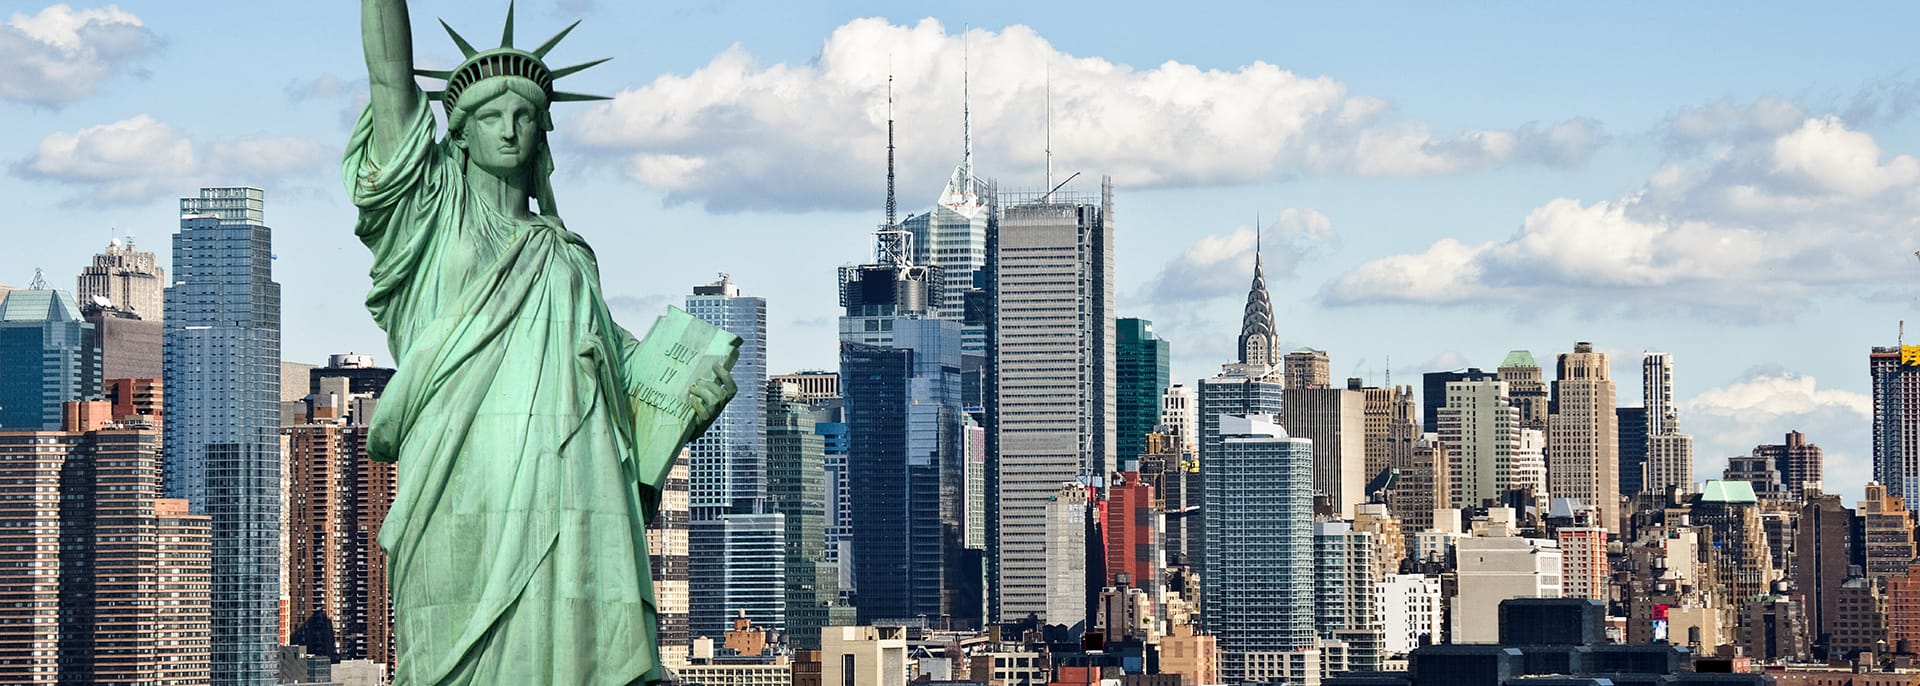 The Statue of Liberty stands in front of a city skyline on a trip to New York.